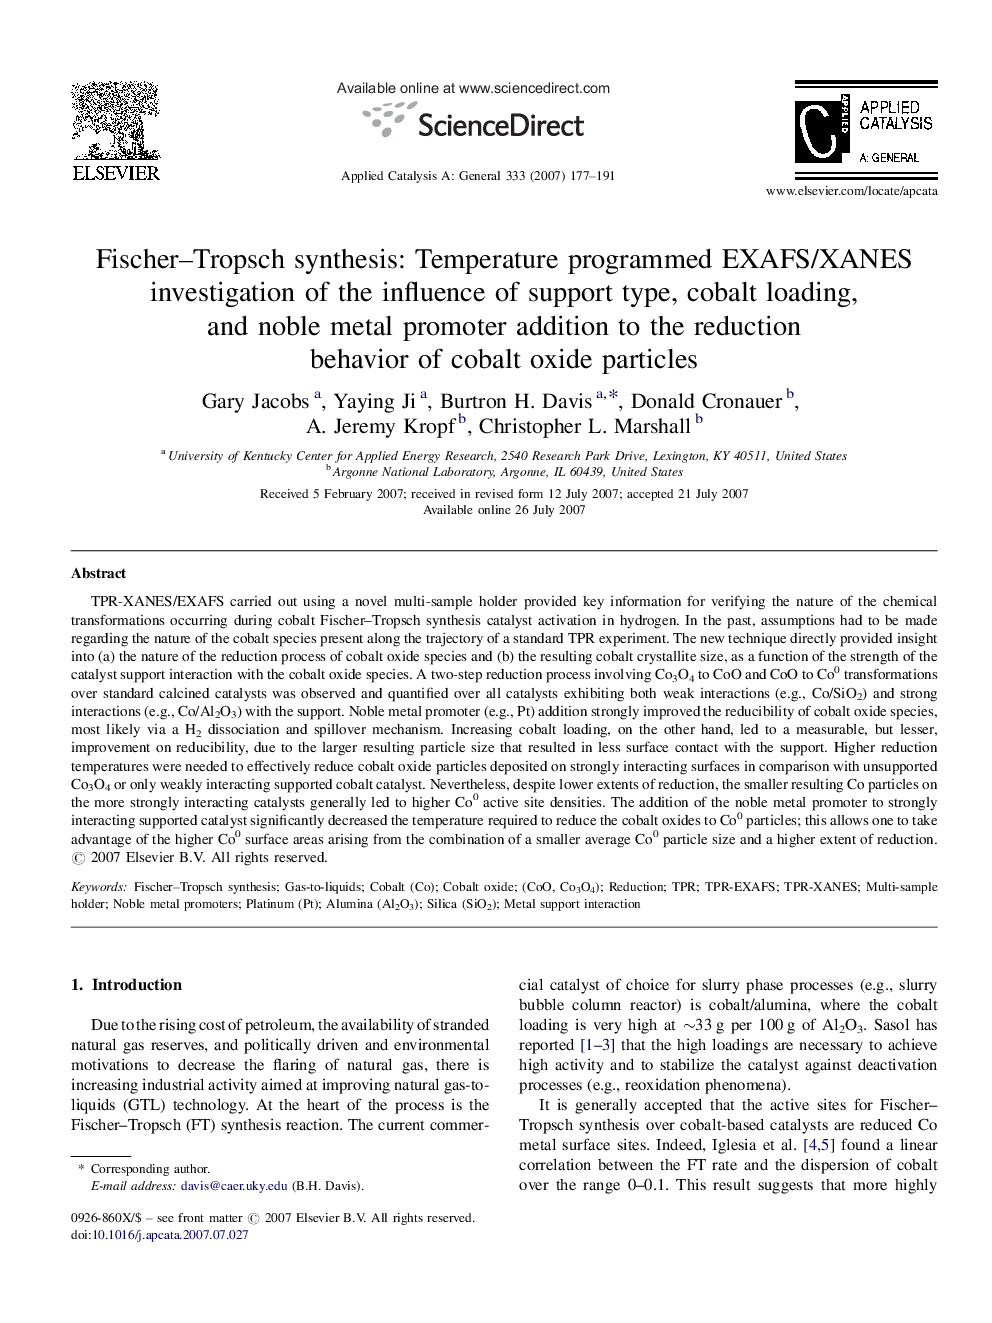 Fischer–Tropsch synthesis: Temperature programmed EXAFS/XANES investigation of the influence of support type, cobalt loading, and noble metal promoter addition to the reduction behavior of cobalt oxide particles